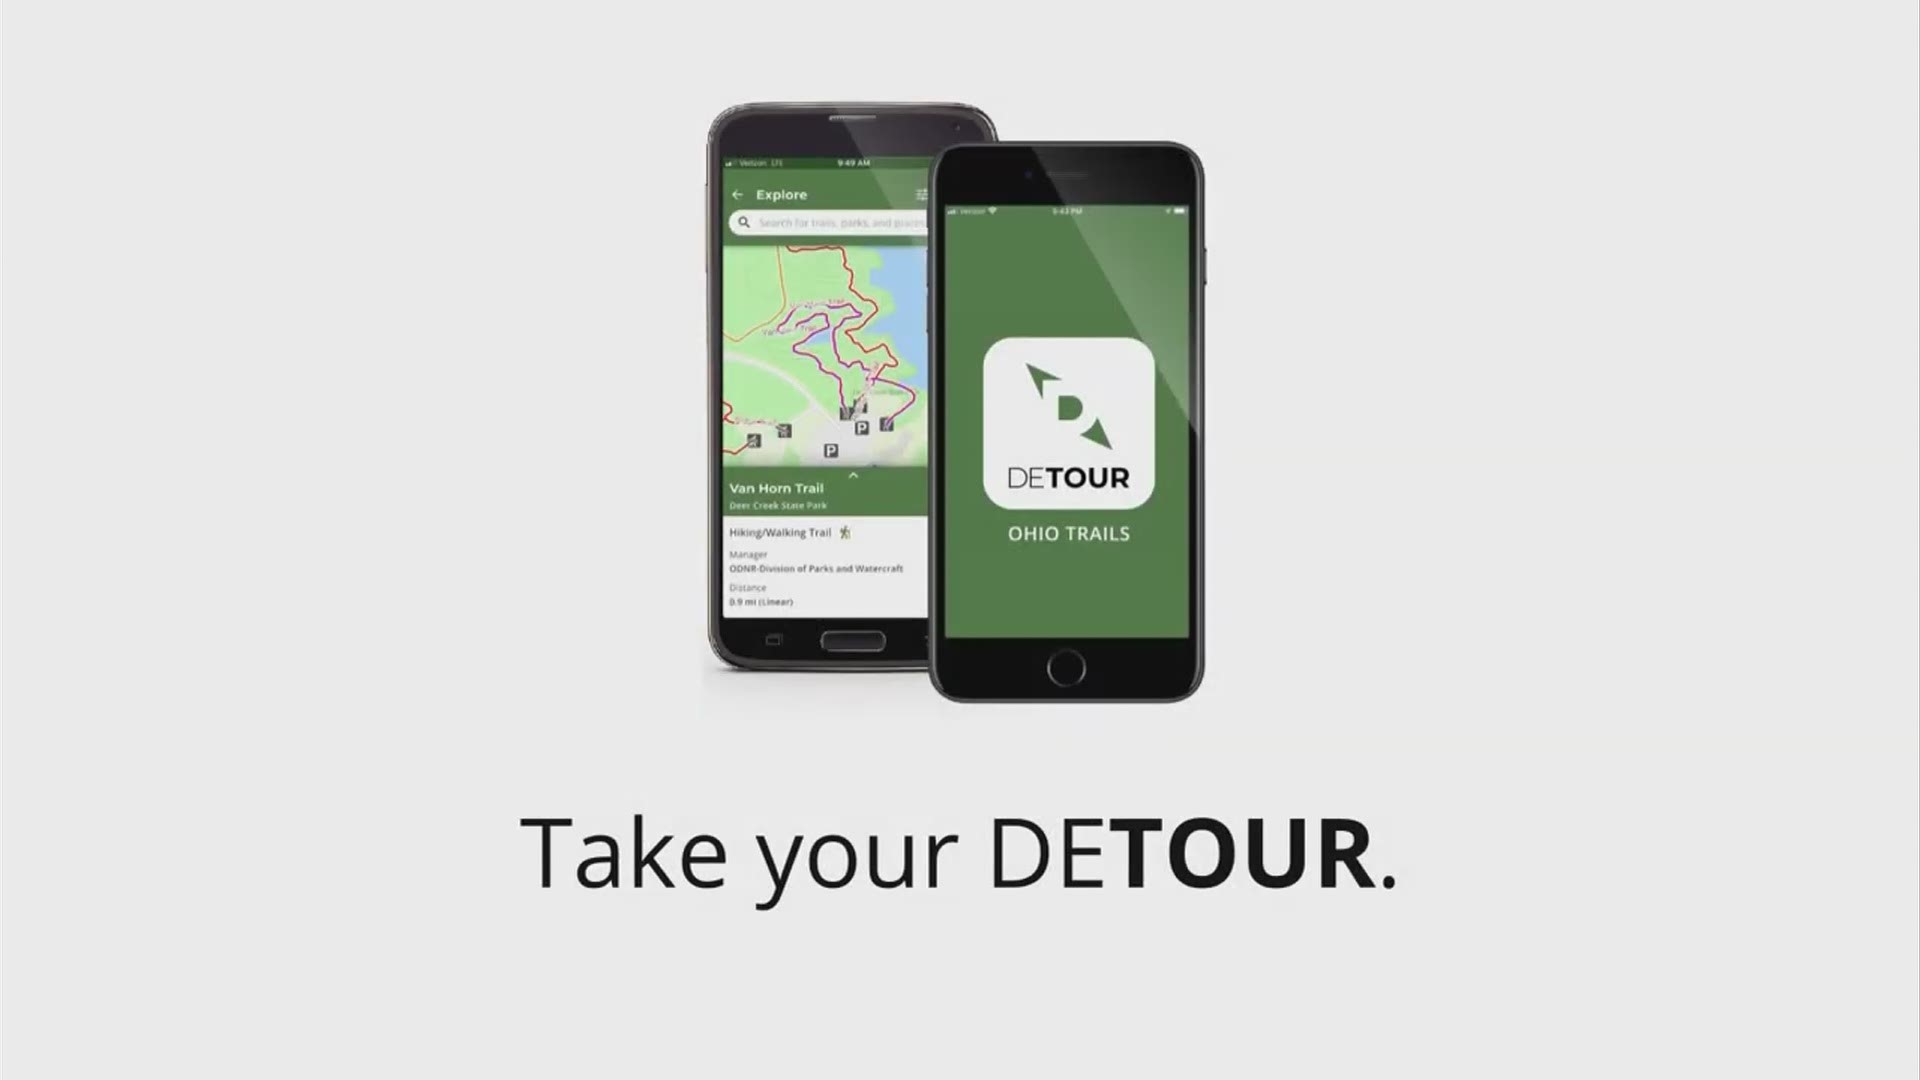 People can search thousands of trails across the state for difficulty, type and distance on the app.